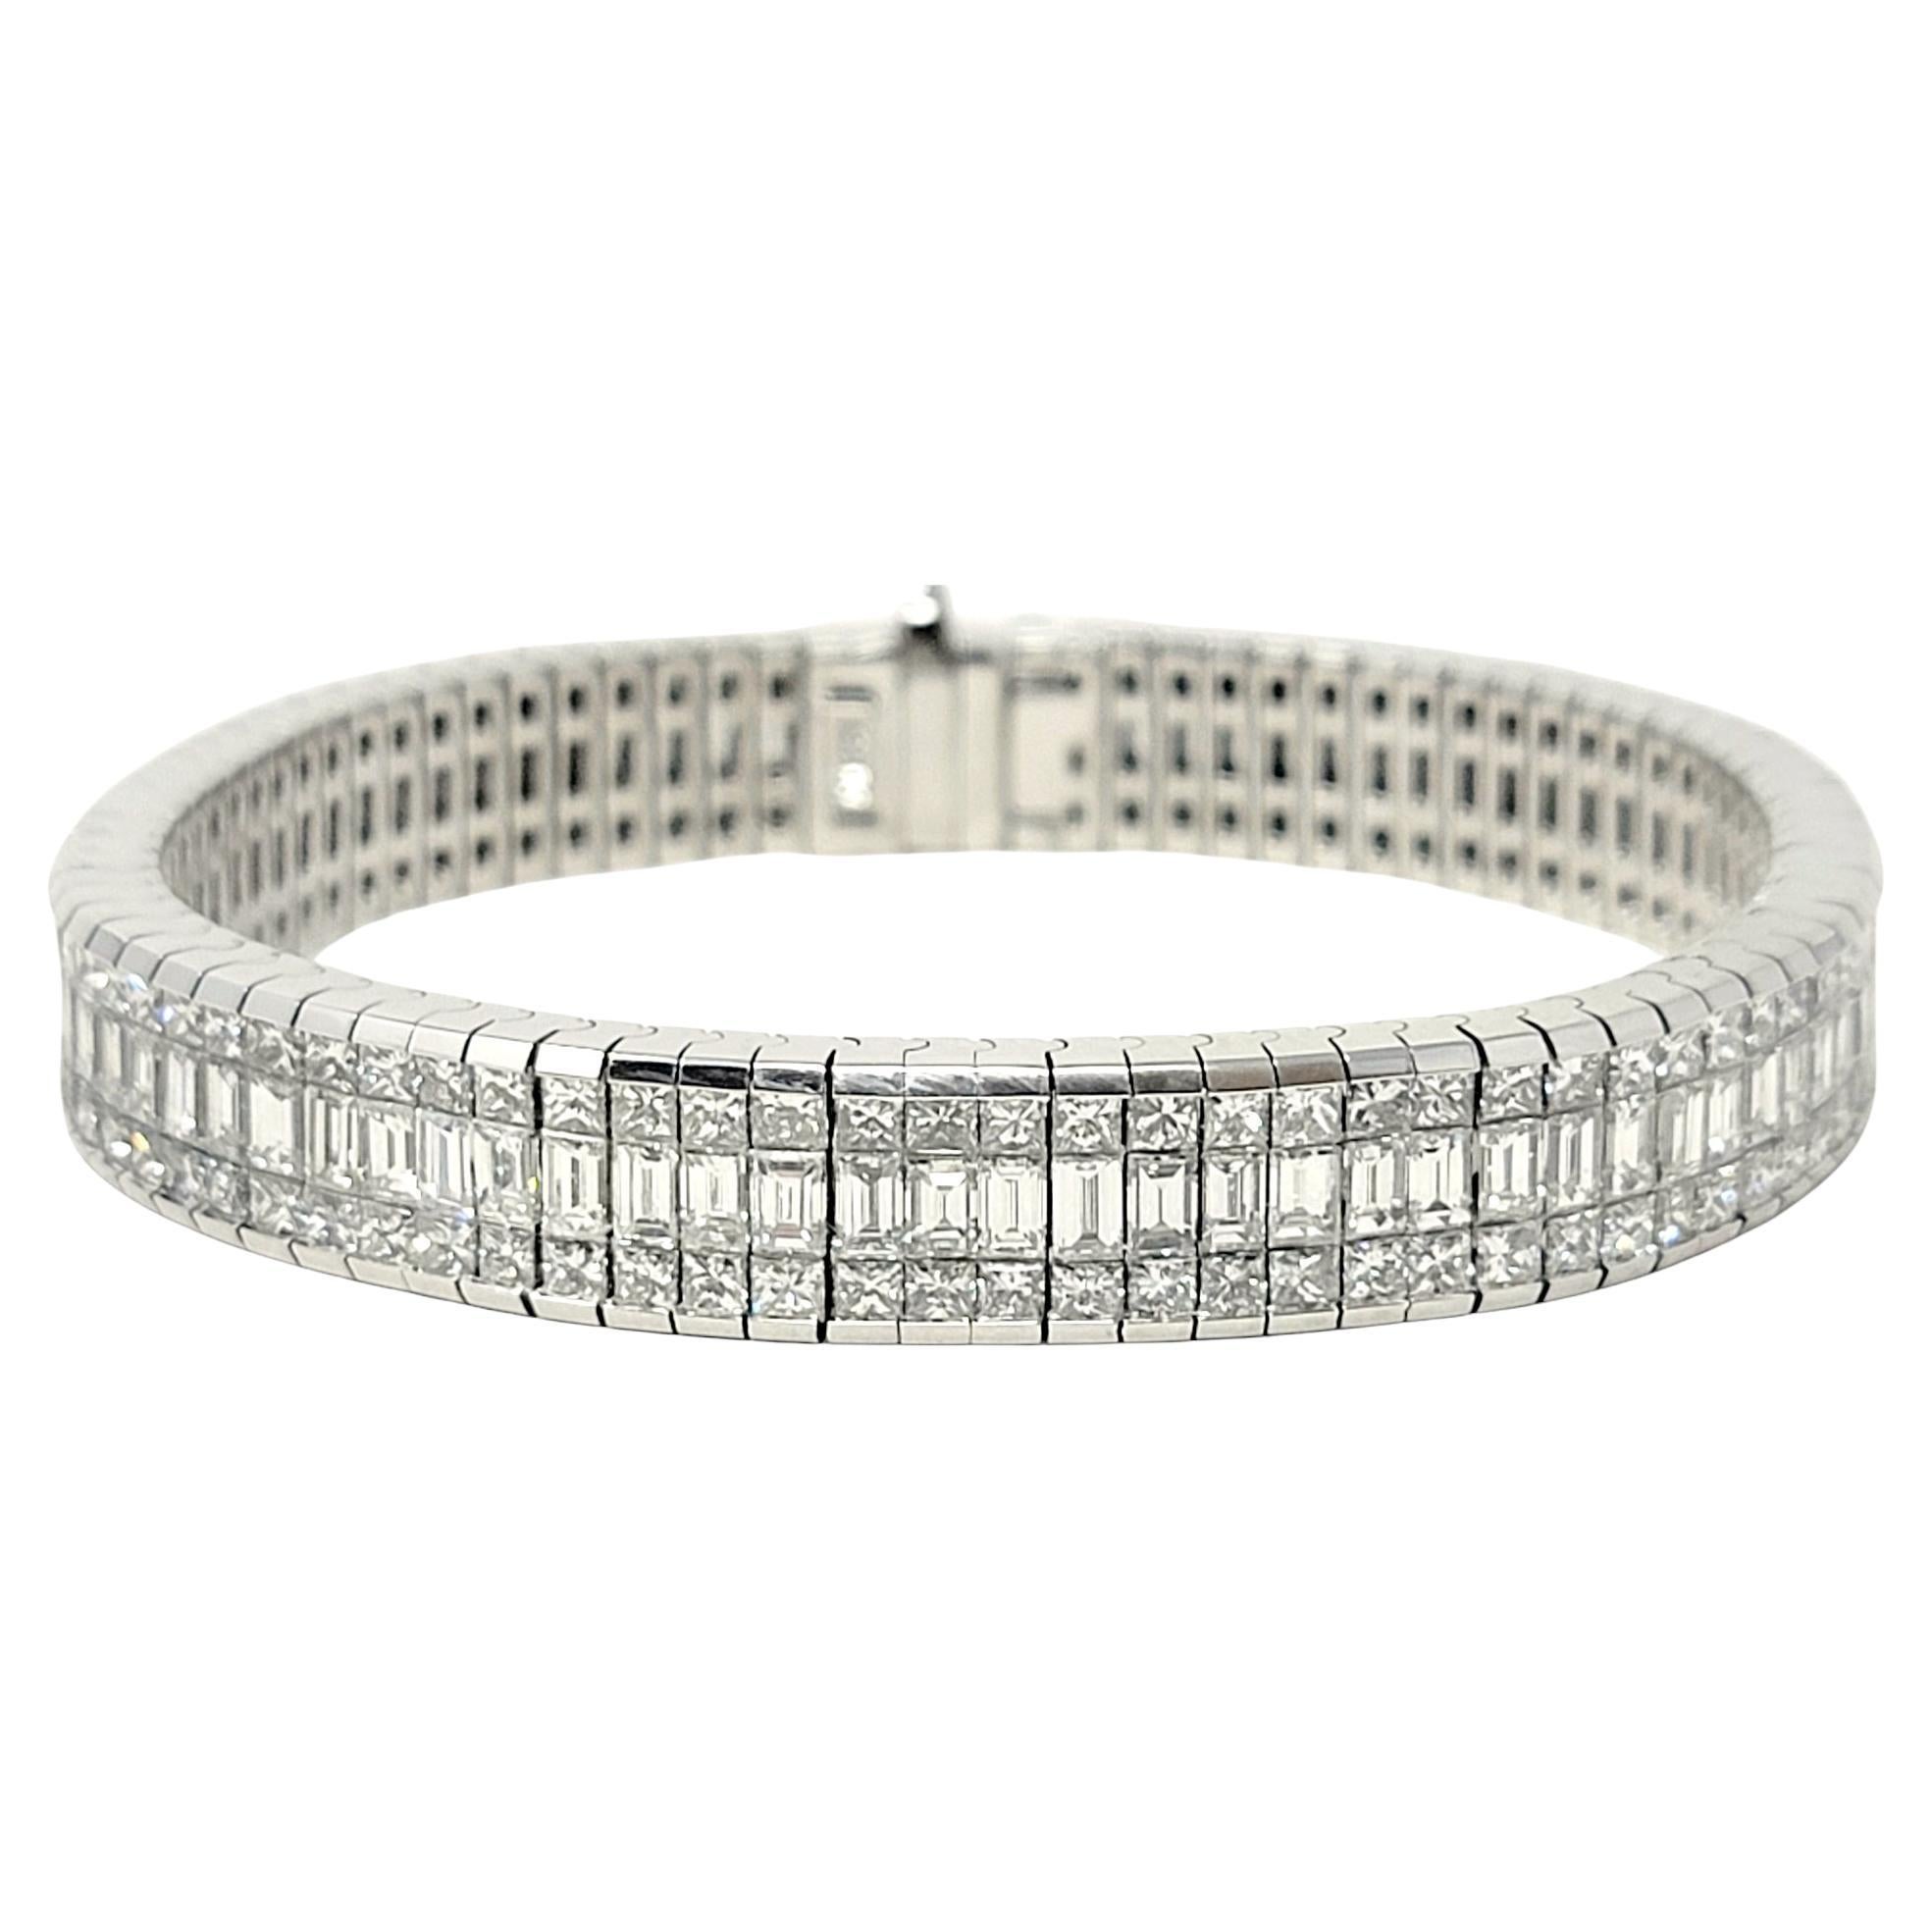 This striking bracelet is filled from edge to edge with icy white natural diamonds, creating an absolutely  stunning amount of sparkle on the wrist. Multiple rows of princess and baguette cut diamonds are invisible set throughout, creating a